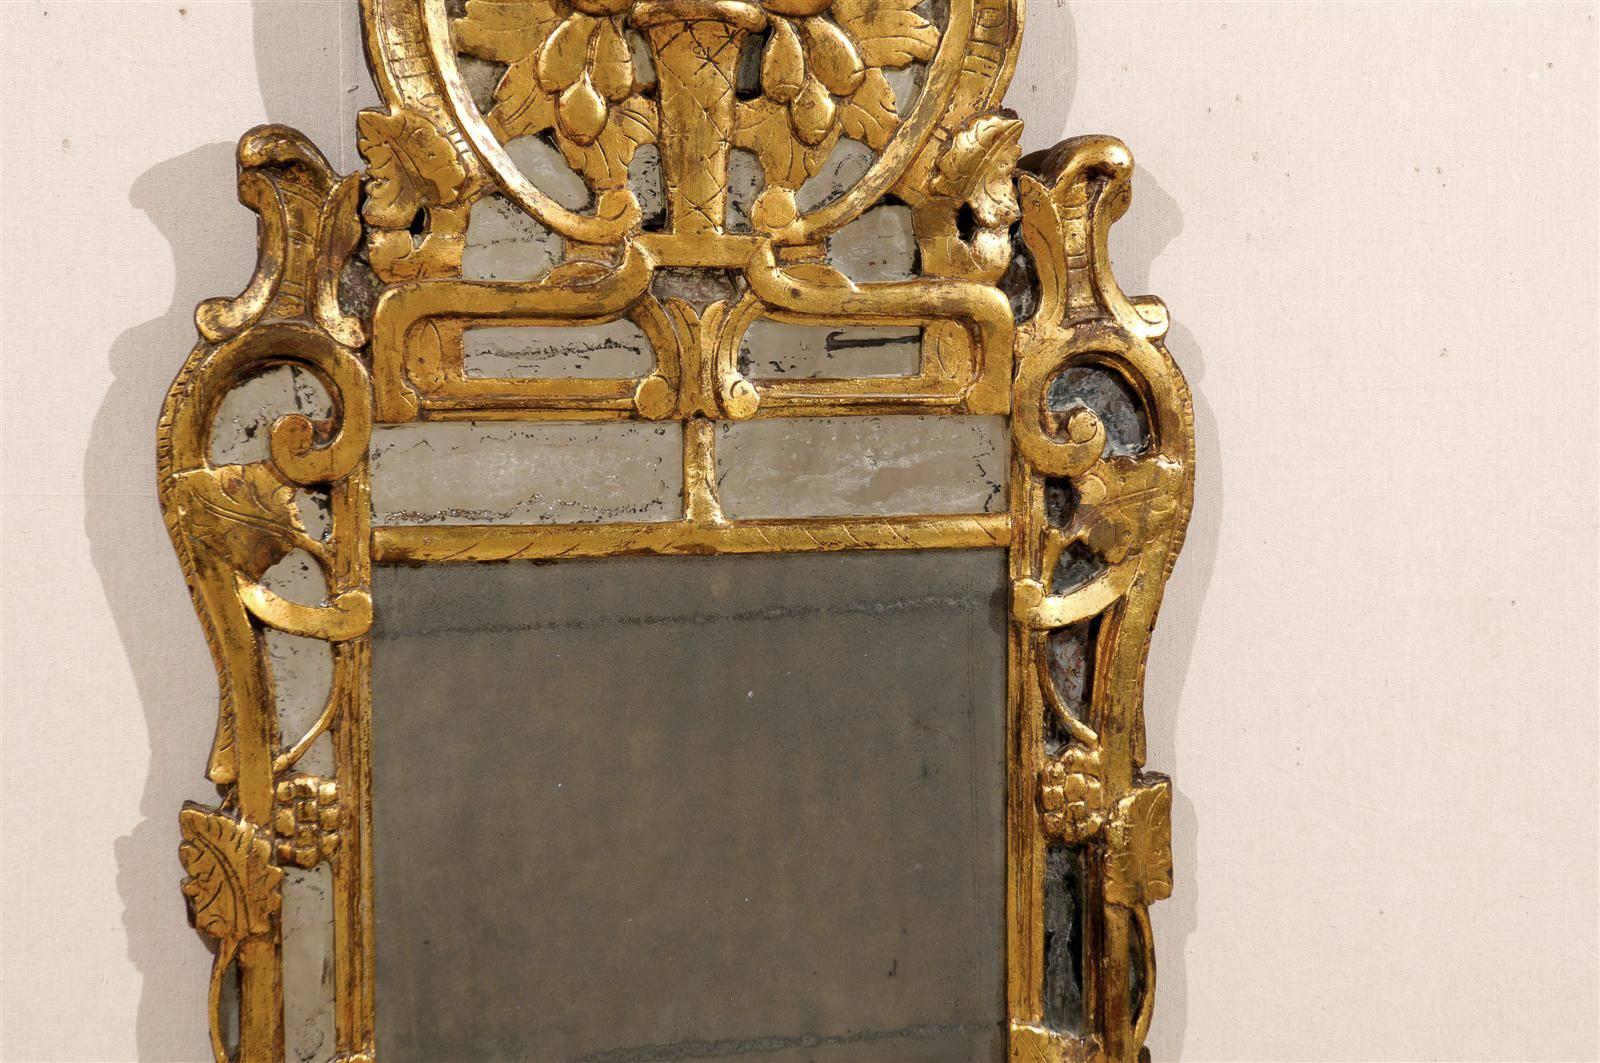 Wood A French Rococo Style Giltwood Mirror From the Early 19th Century